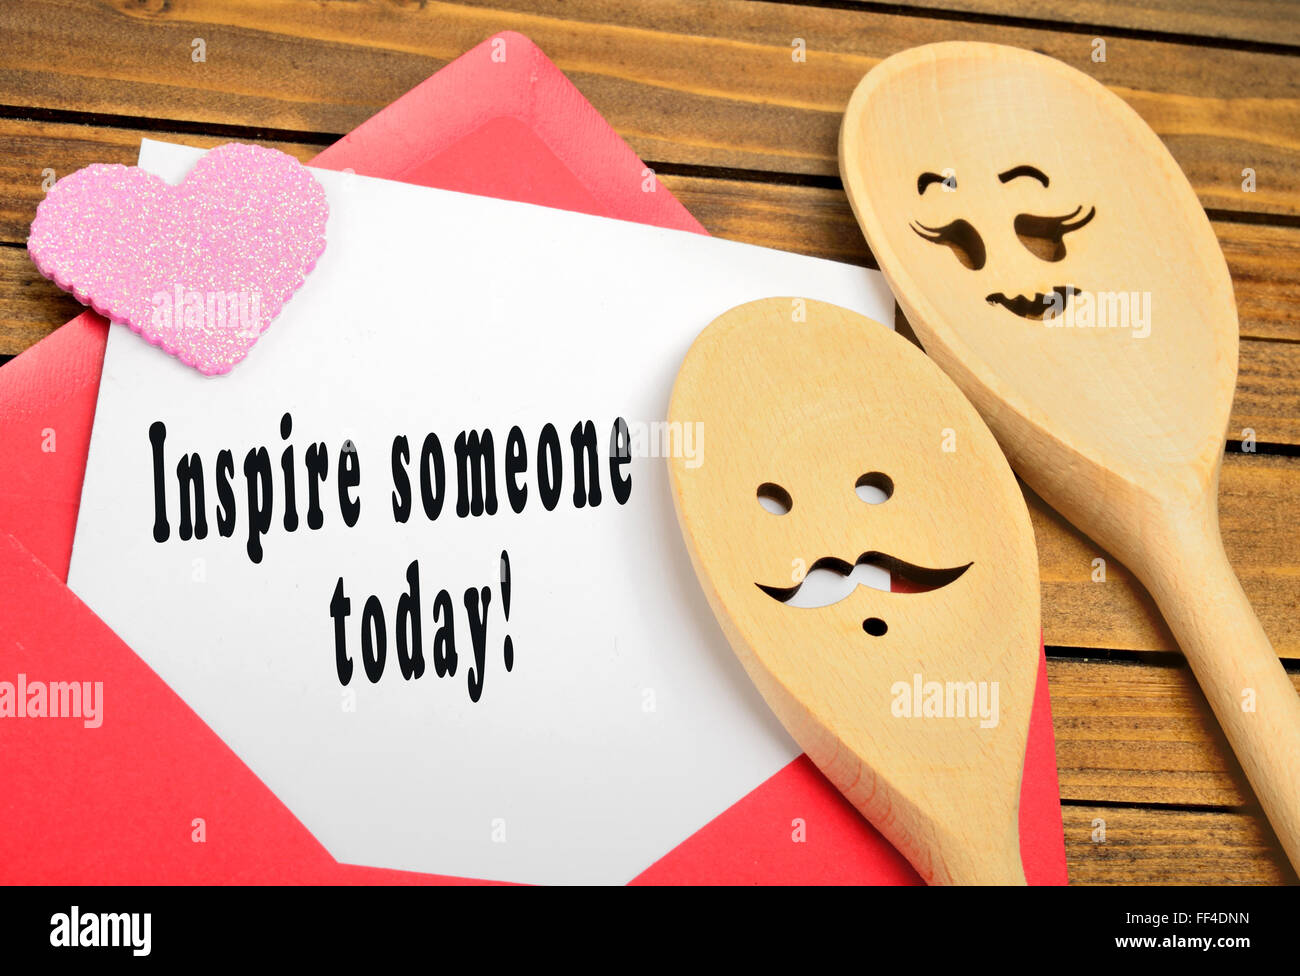 Inspire someone today written on paper Stock Photo